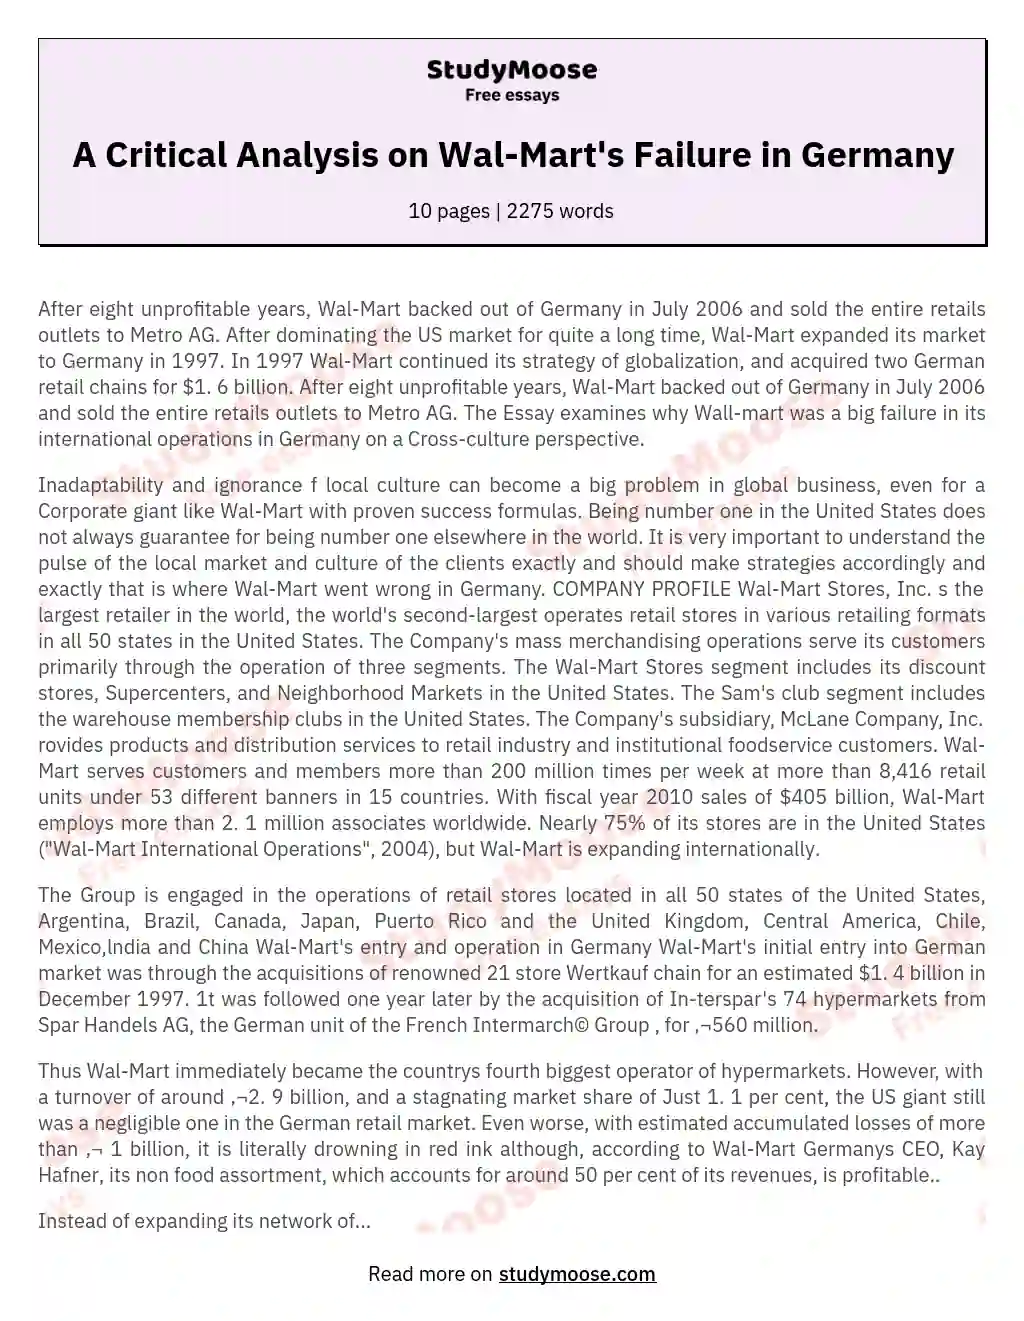 A Critical Analysis on Wal-Mart's Failure in Germany essay